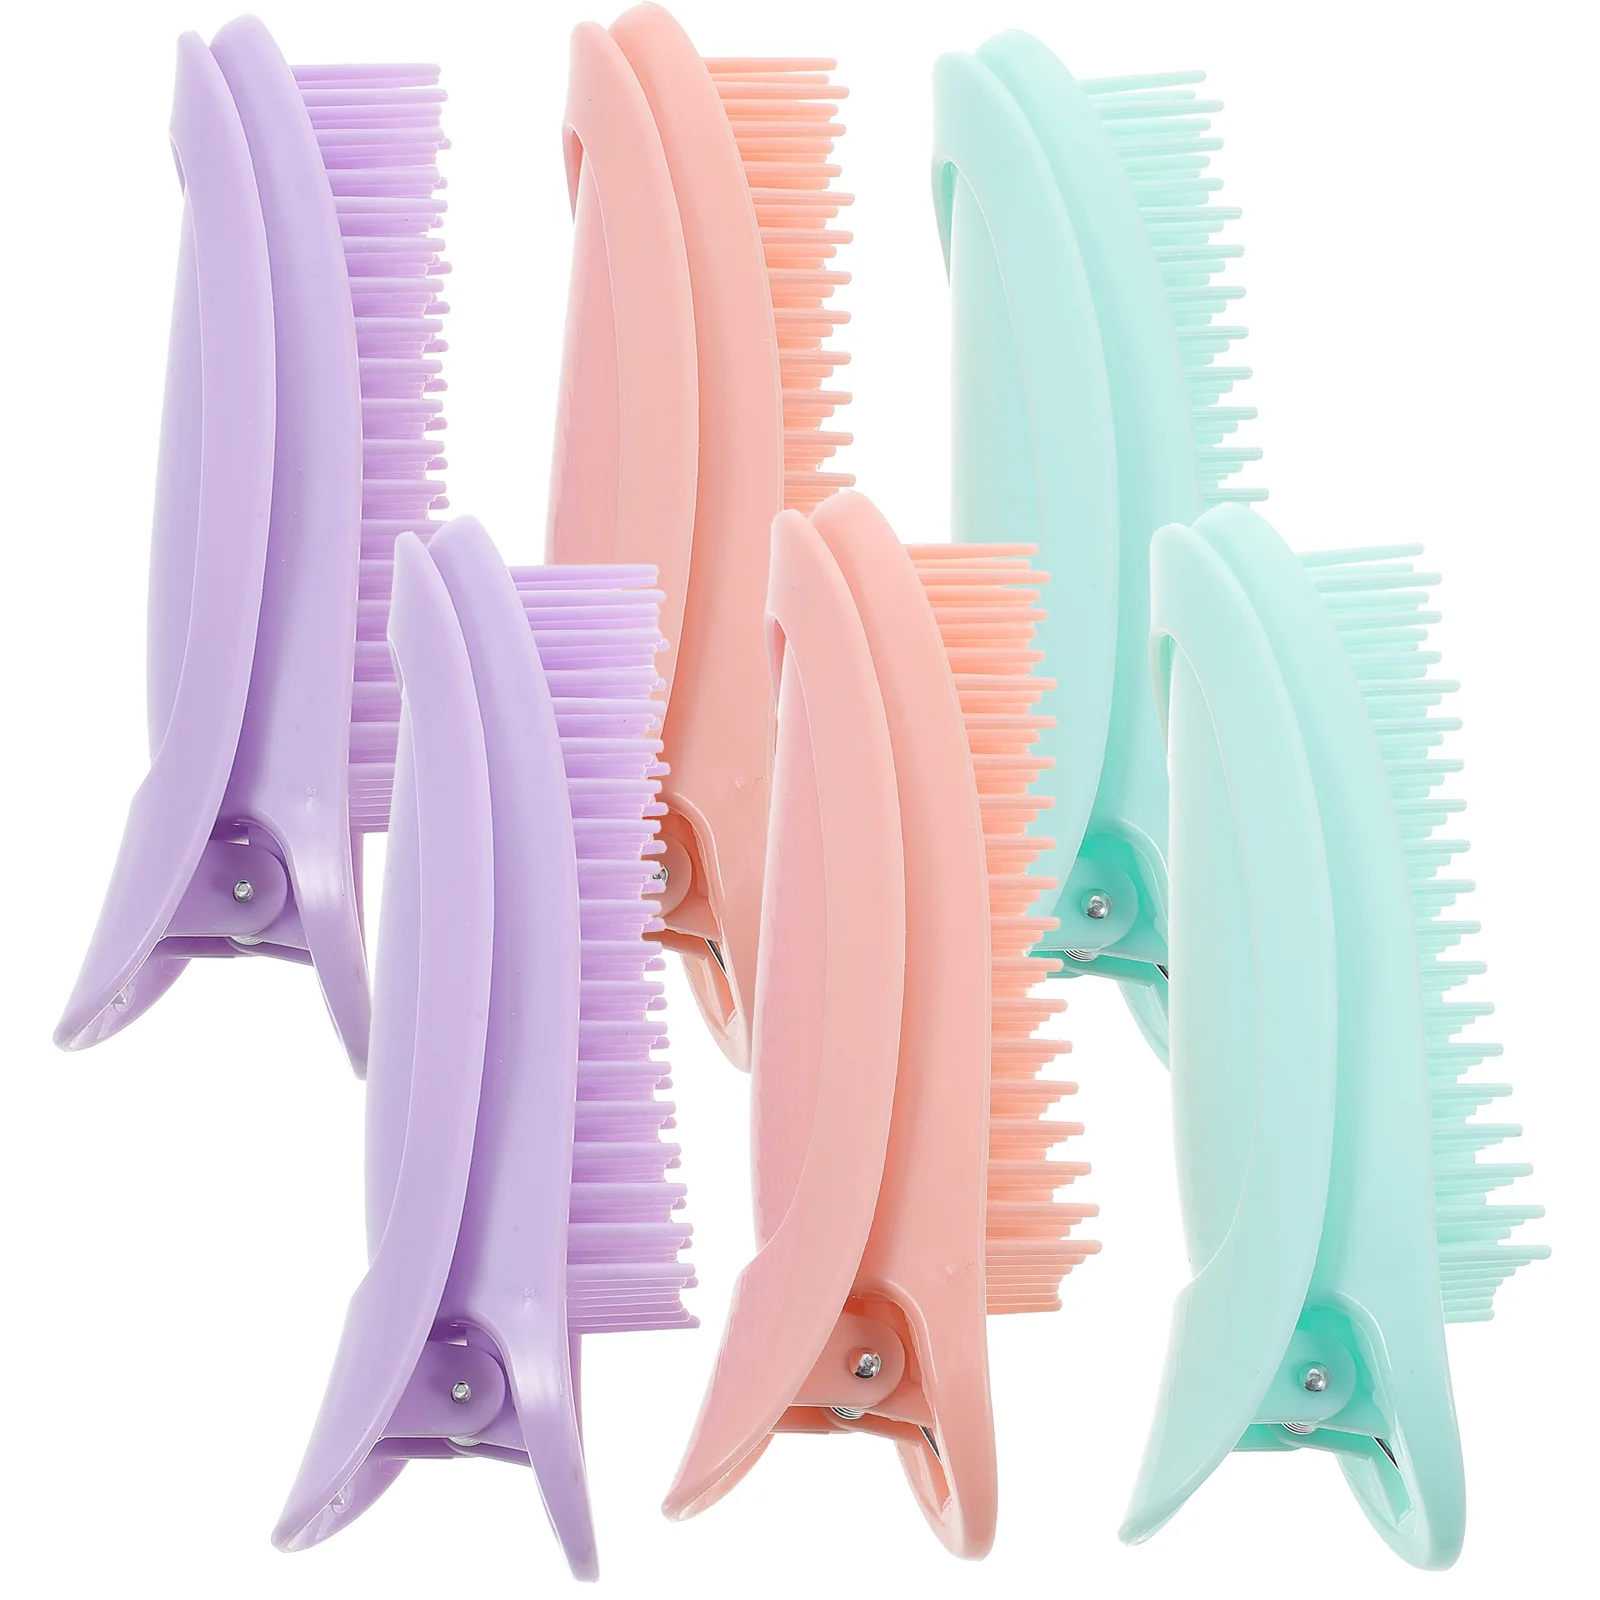 

6 Pcs Roller Clips Wave Hair Curler Root Lift Tool Fluffy Clamps Rollers Self Grip Bangs Volumizing Curly